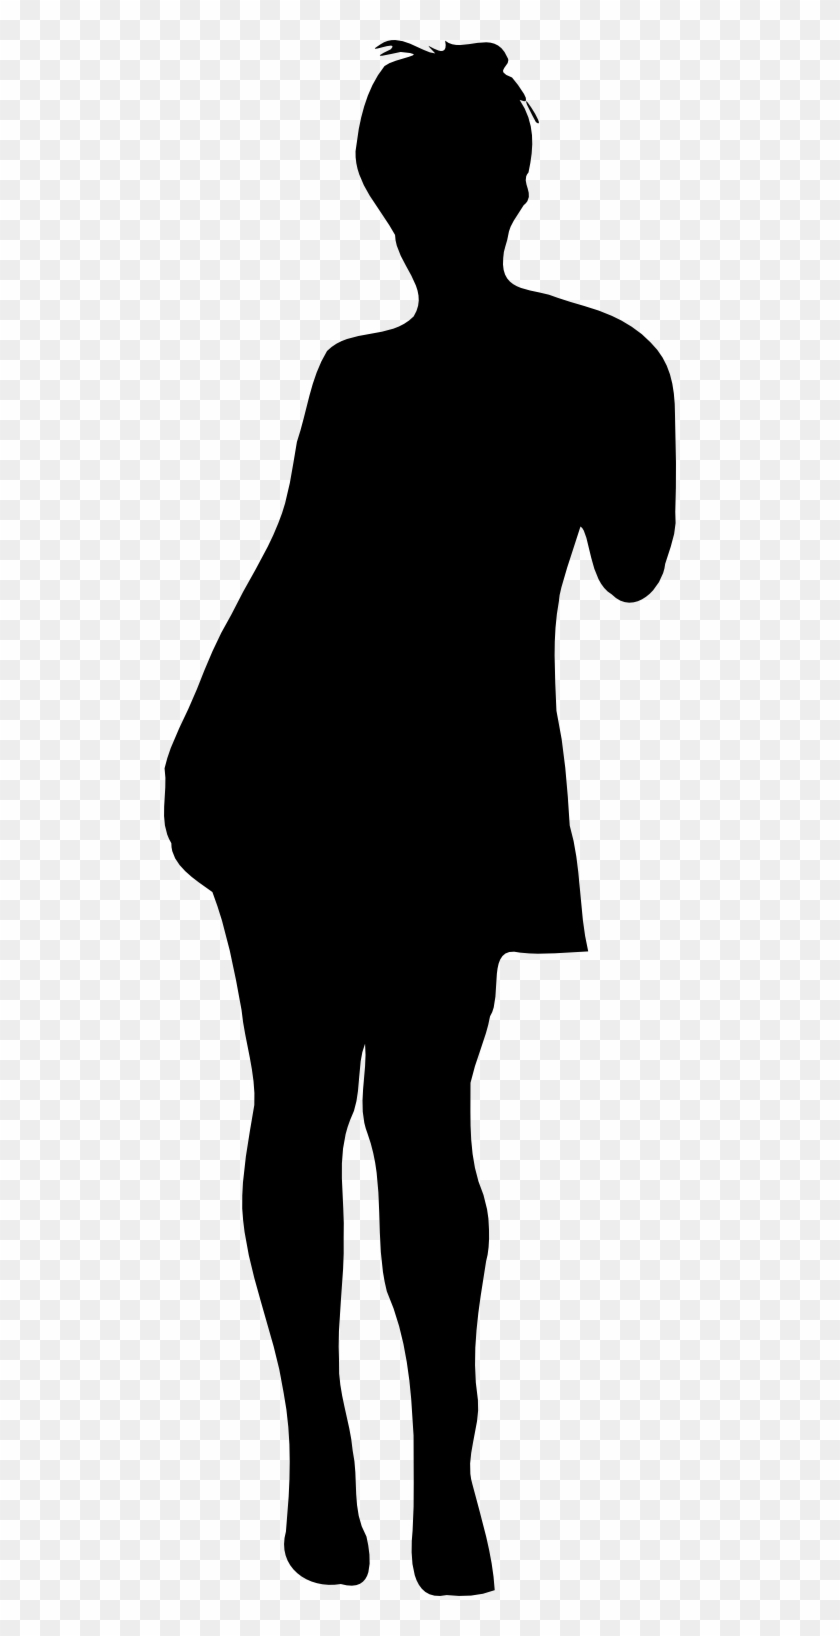 Woman Silhouette Vector Free Download - Mother Silhouette Vector Free Dowload #257326